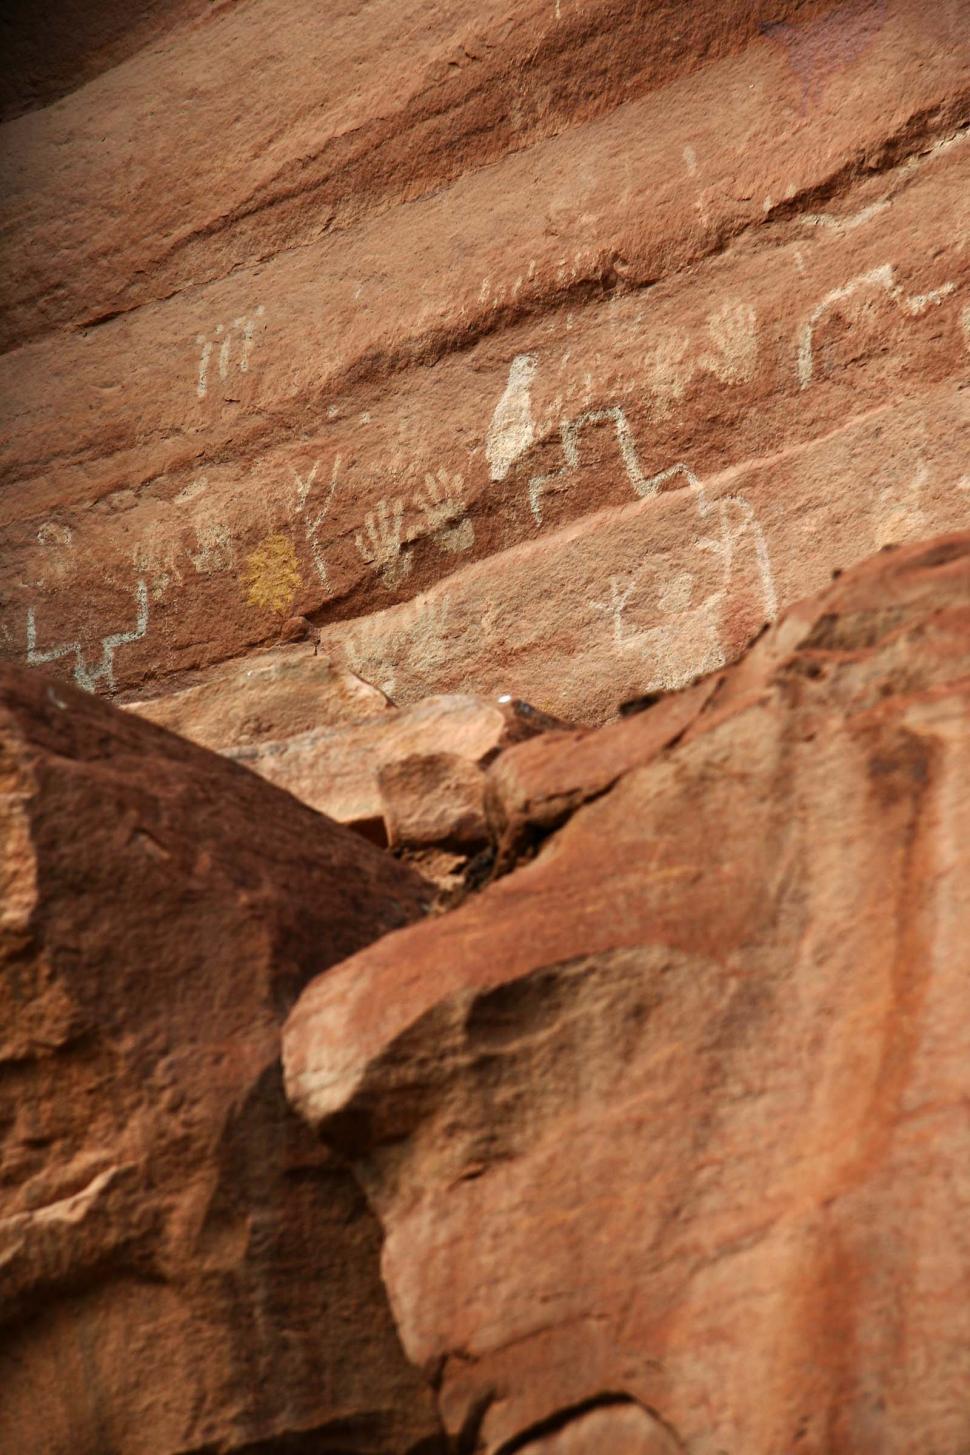 Free Image of cliff cliffs canyon de chelly chelly canyon de arizona indian native american monument national navajo southwest wall petroglyph drawing hands prints handprints 